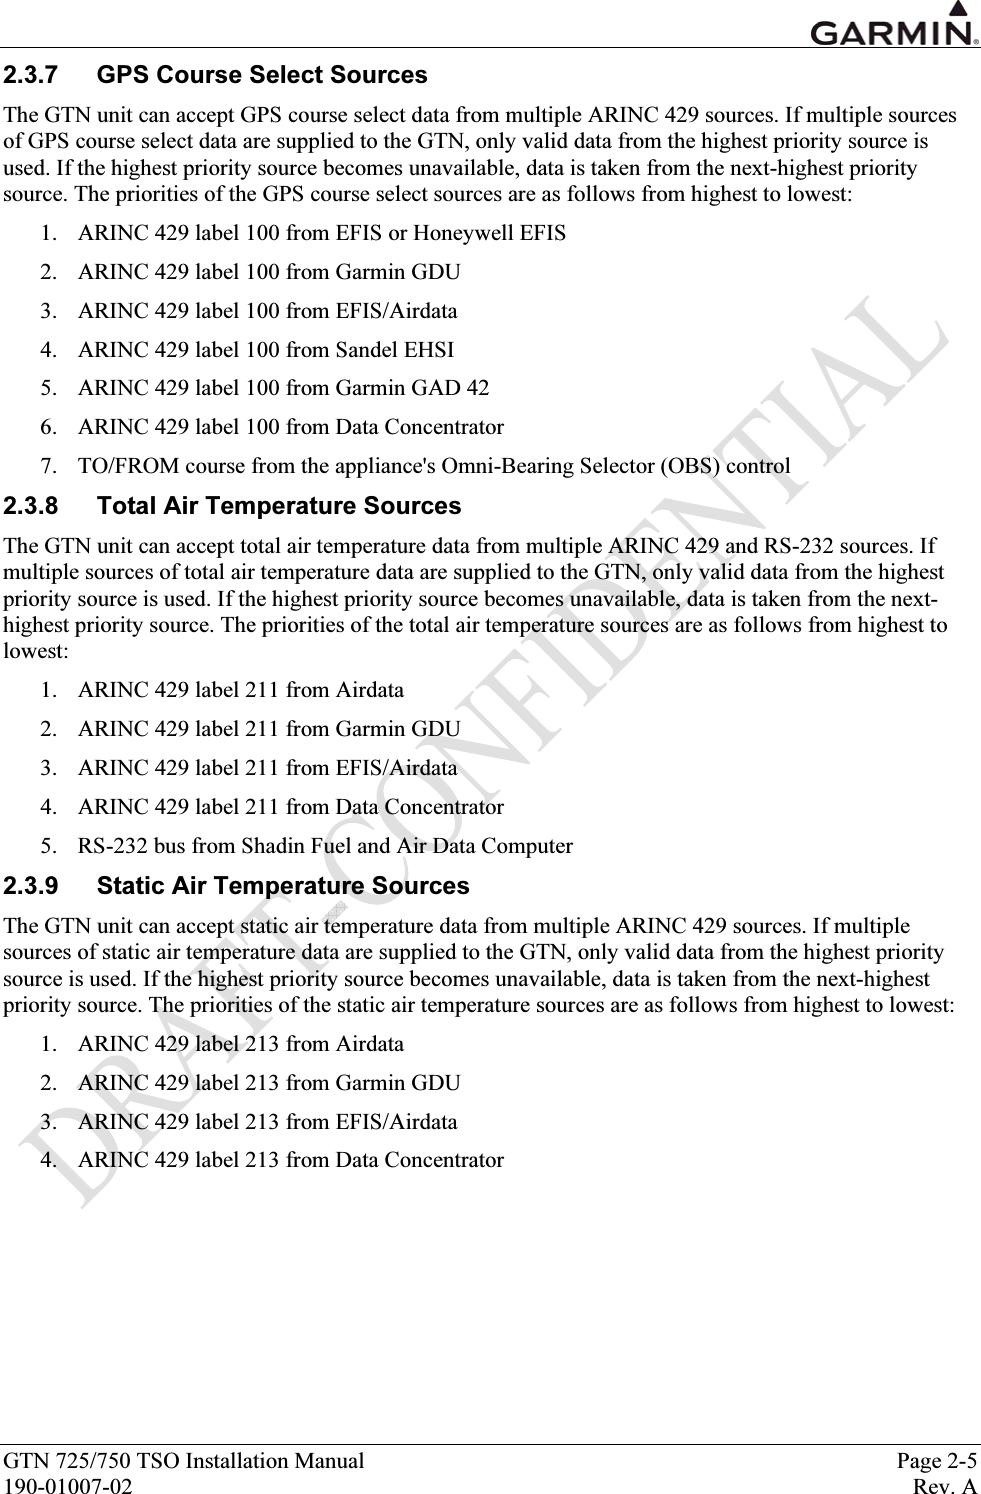  GTN 725/750 TSO Installation Manual  Page 2-5 190-01007-02  Rev. A 2.3.7  GPS Course Select Sources The GTN unit can accept GPS course select data from multiple ARINC 429 sources. If multiple sources of GPS course select data are supplied to the GTN, only valid data from the highest priority source is used. If the highest priority source becomes unavailable, data is taken from the next-highest priority source. The priorities of the GPS course select sources are as follows from highest to lowest: 1. ARINC 429 label 100 from EFIS or Honeywell EFIS 2. ARINC 429 label 100 from Garmin GDU 3. ARINC 429 label 100 from EFIS/Airdata 4. ARINC 429 label 100 from Sandel EHSI 5. ARINC 429 label 100 from Garmin GAD 42 6. ARINC 429 label 100 from Data Concentrator 7. TO/FROM course from the appliance&apos;s Omni-Bearing Selector (OBS) control 2.3.8  Total Air Temperature Sources The GTN unit can accept total air temperature data from multiple ARINC 429 and RS-232 sources. If multiple sources of total air temperature data are supplied to the GTN, only valid data from the highest priority source is used. If the highest priority source becomes unavailable, data is taken from the next-highest priority source. The priorities of the total air temperature sources are as follows from highest to lowest: 1. ARINC 429 label 211 from Airdata 2. ARINC 429 label 211 from Garmin GDU 3. ARINC 429 label 211 from EFIS/Airdata 4. ARINC 429 label 211 from Data Concentrator 5. RS-232 bus from Shadin Fuel and Air Data Computer 2.3.9  Static Air Temperature Sources The GTN unit can accept static air temperature data from multiple ARINC 429 sources. If multiple sources of static air temperature data are supplied to the GTN, only valid data from the highest priority source is used. If the highest priority source becomes unavailable, data is taken from the next-highest priority source. The priorities of the static air temperature sources are as follows from highest to lowest: 1. ARINC 429 label 213 from Airdata 2. ARINC 429 label 213 from Garmin GDU 3. ARINC 429 label 213 from EFIS/Airdata 4. ARINC 429 label 213 from Data Concentrator 